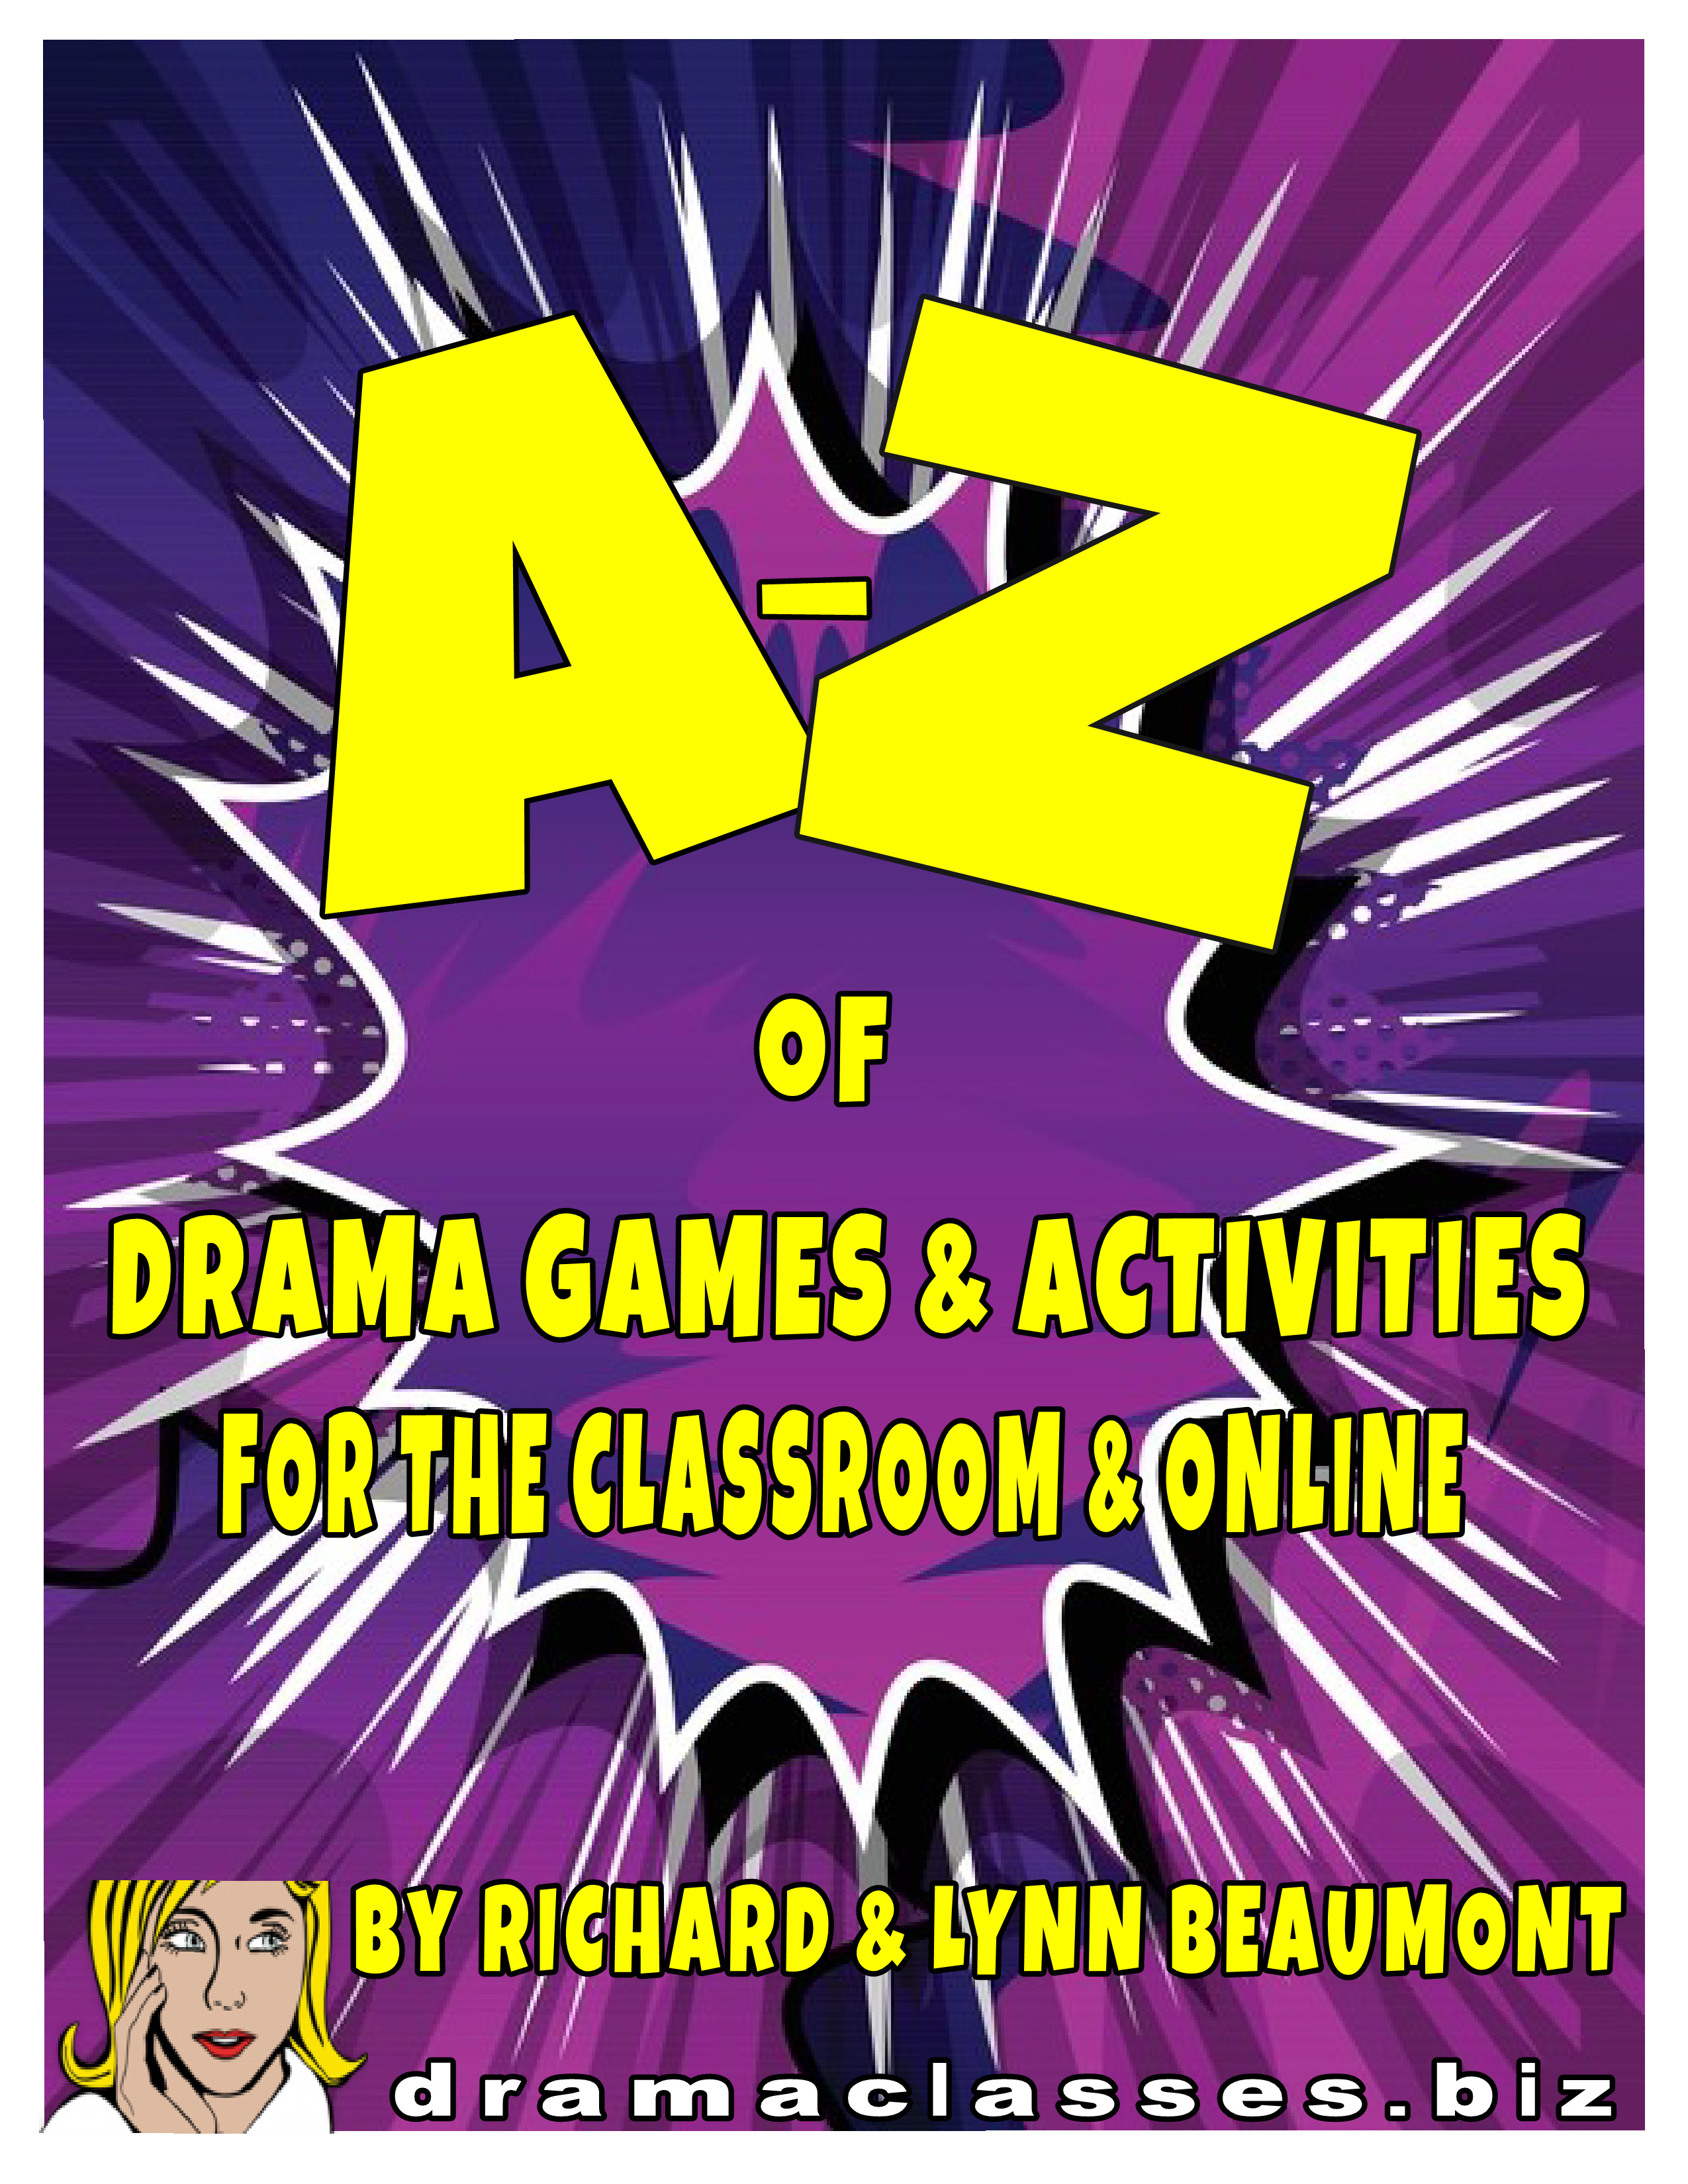 A-Z of drama games